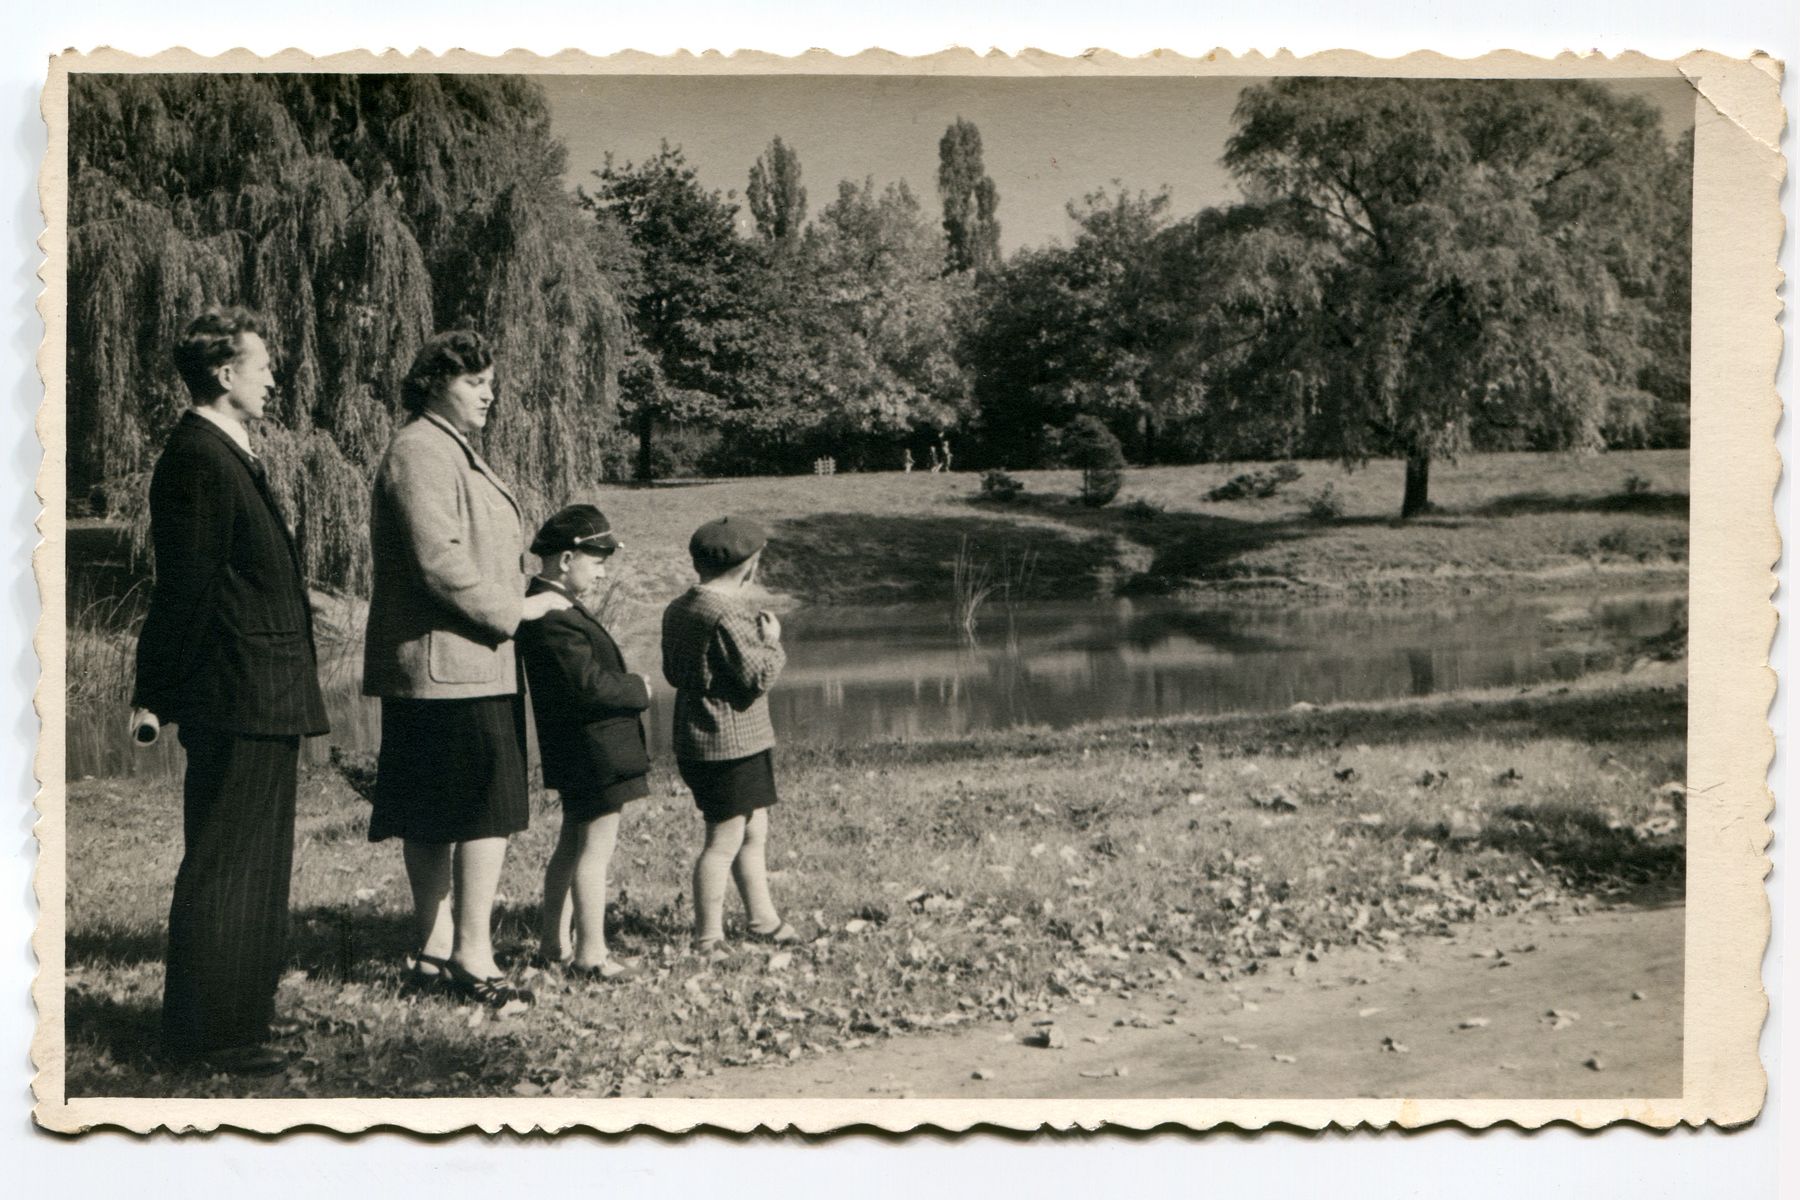 Parents with sons in park